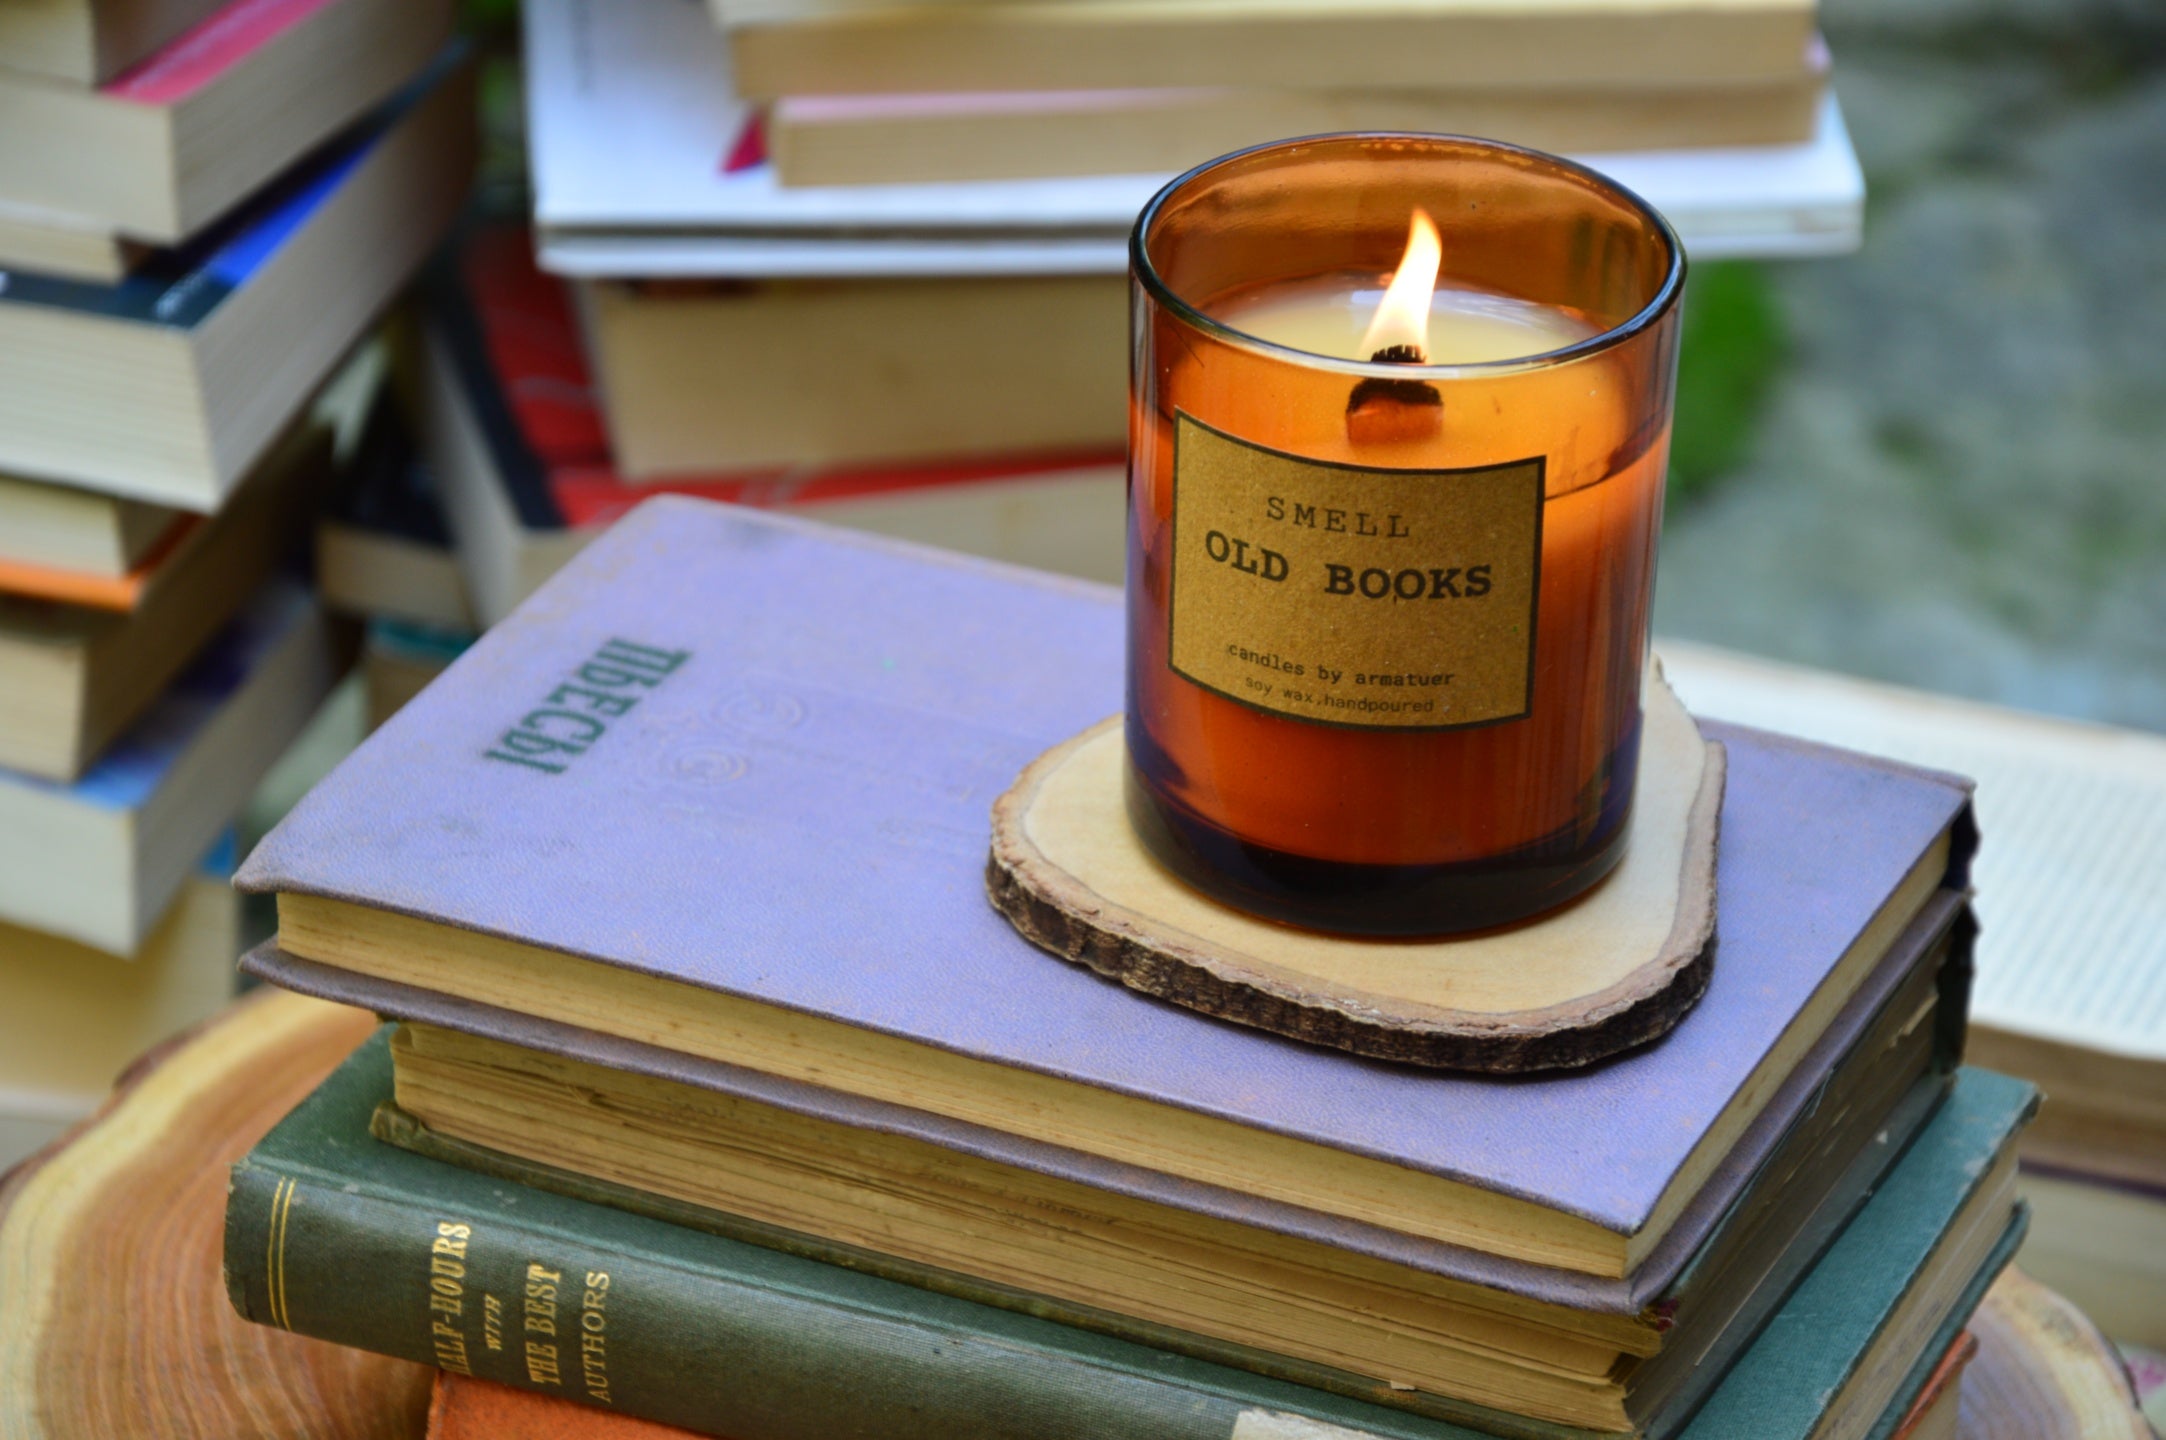 Smell Old Books | Woodwick candle that smells like books